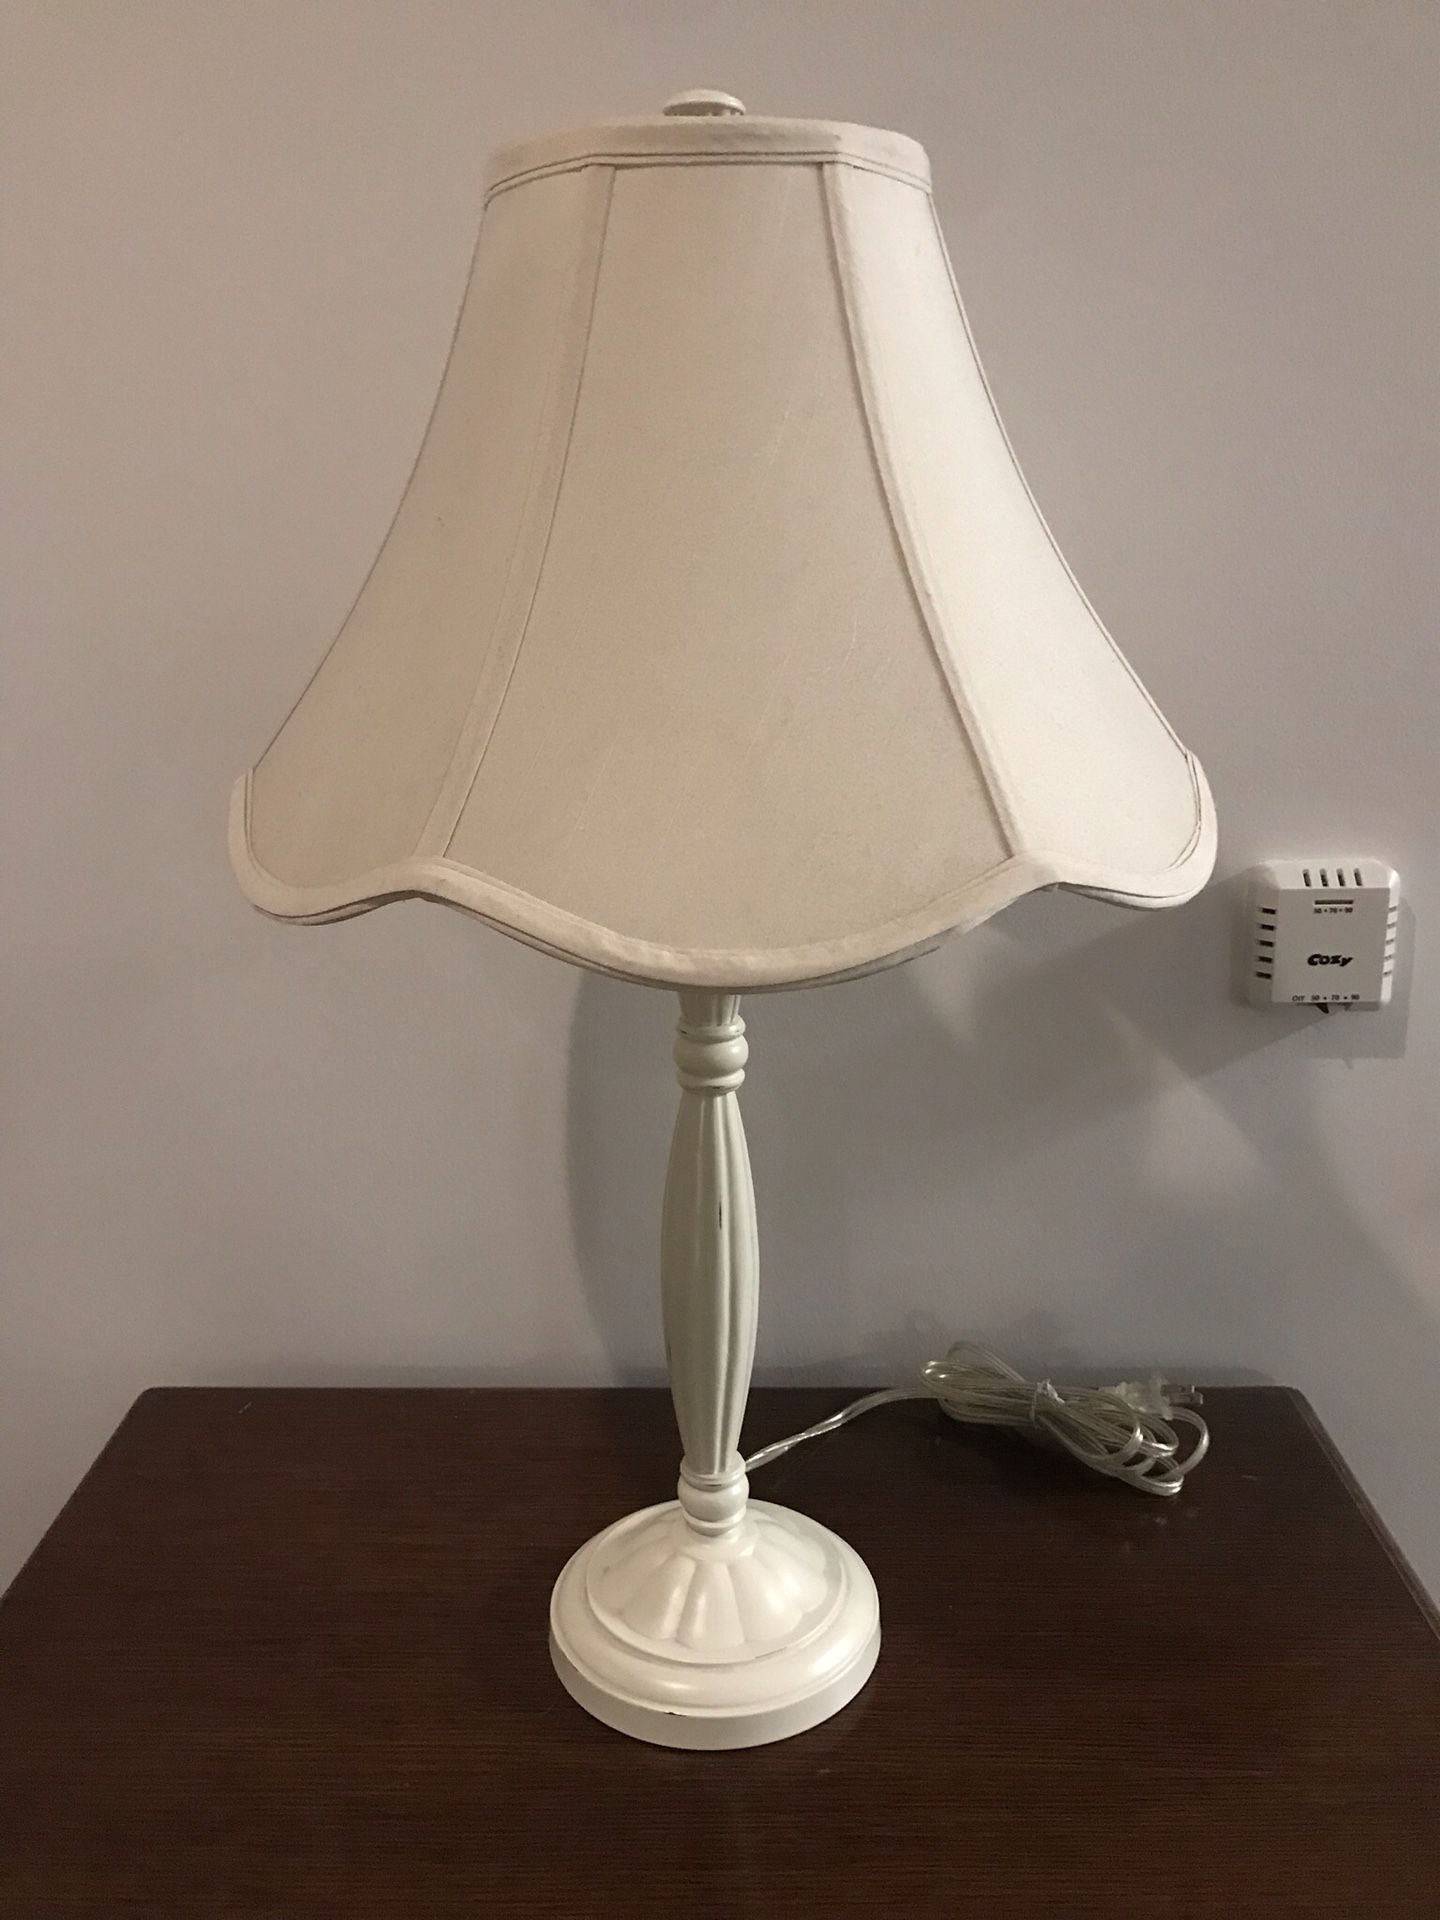 Pottery Barn Off-White Bedside Table Lamp